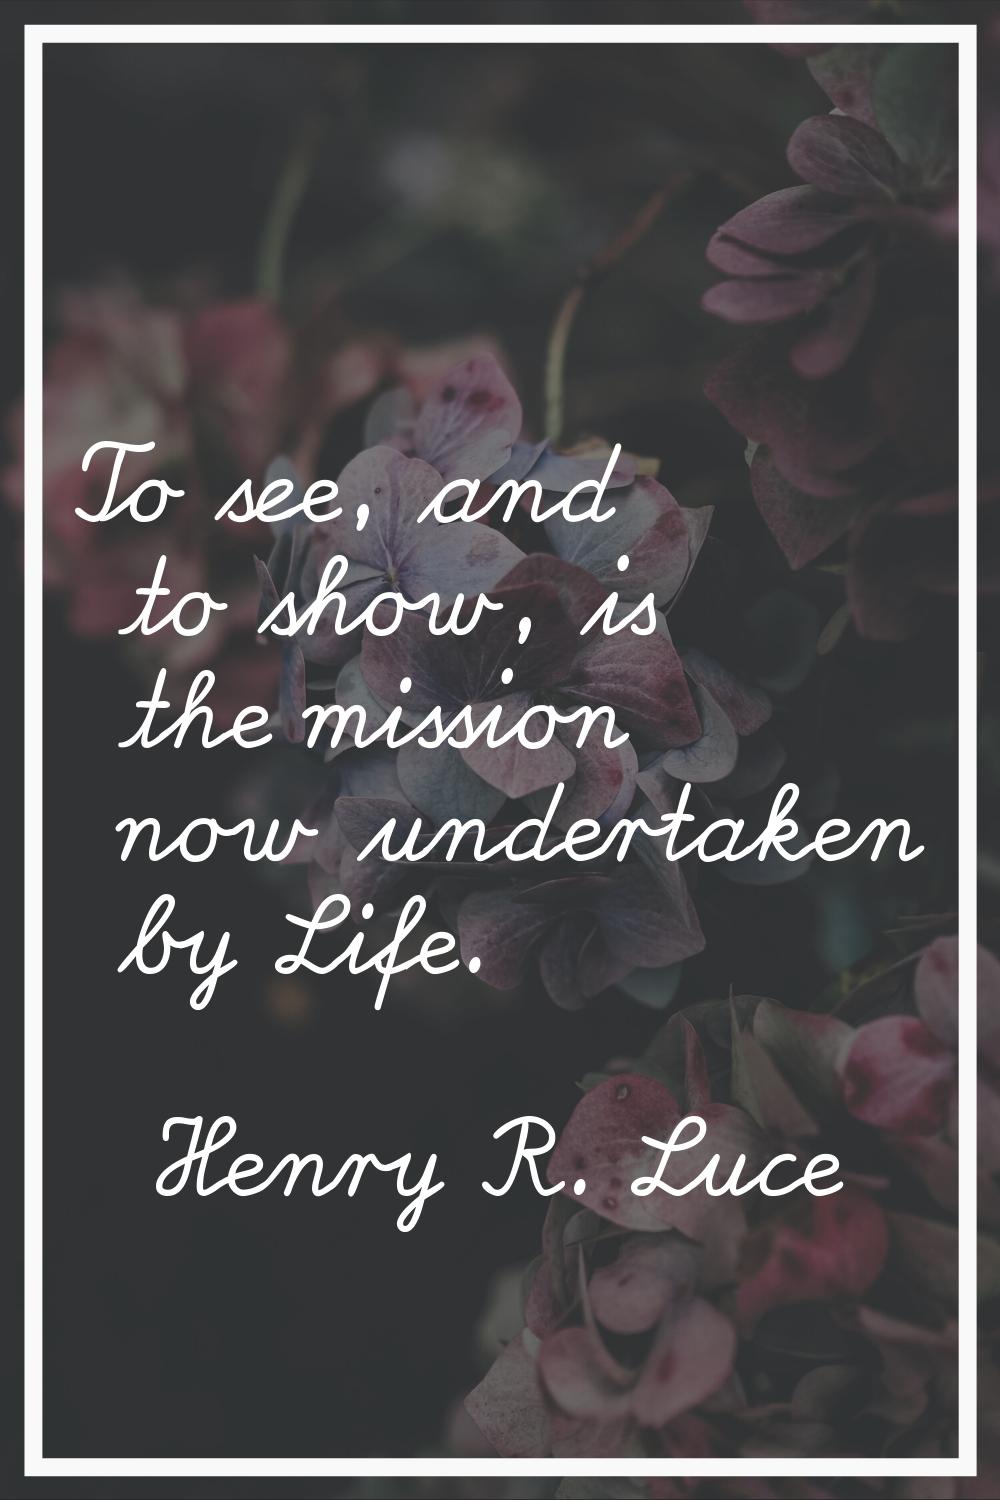 To see, and to show, is the mission now undertaken by Life.